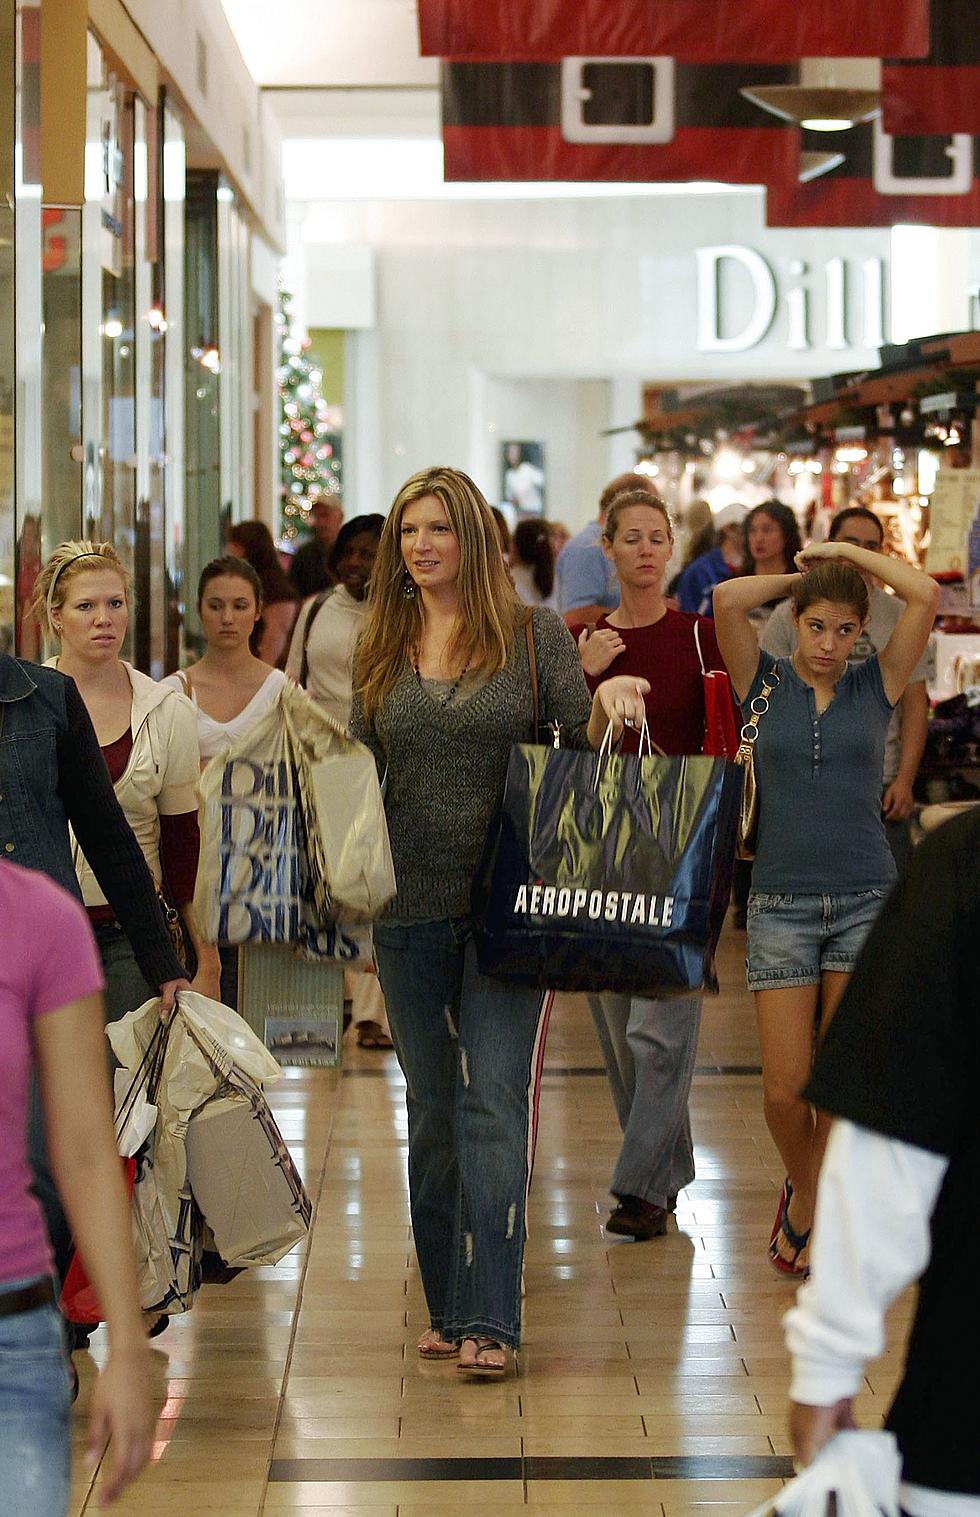 What Stores Do You Want In New Fort Collins Mall?